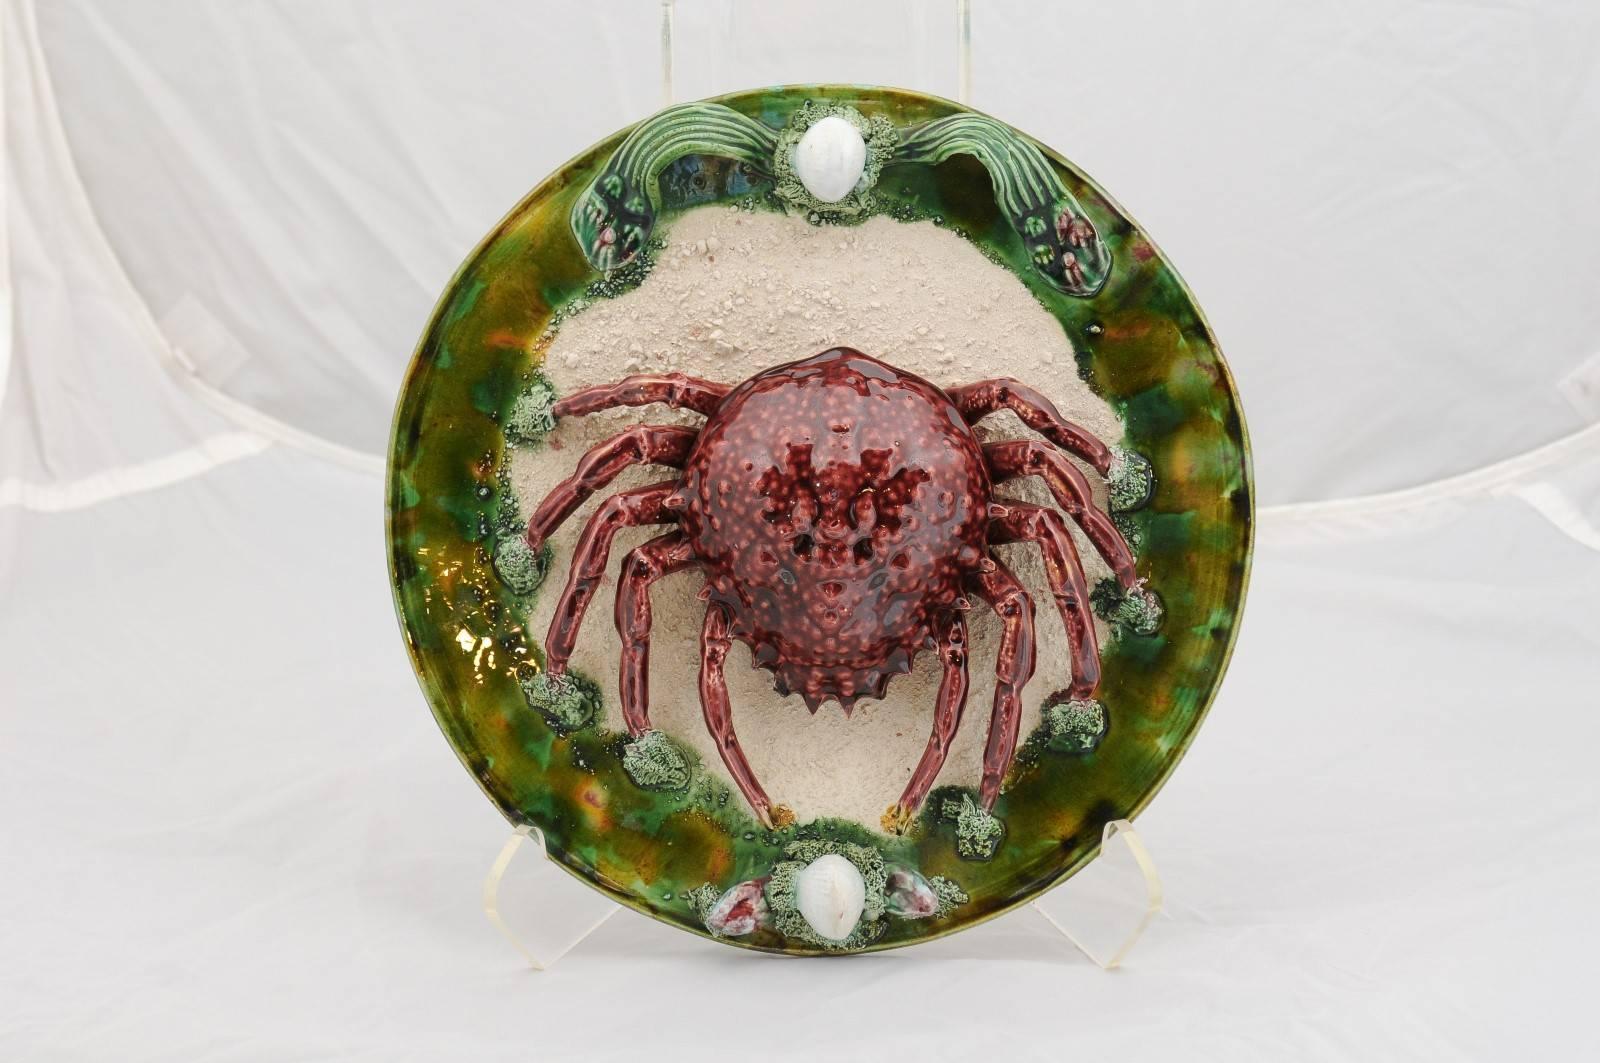 A Portuguese Bernard Palissy style majolica sea spider decorative plate from the 1950s. 
This Portuguese majolica plate from the mid-century modern period is a direct tribute to French Renaissance artist Bernard Palissy who famously developed his